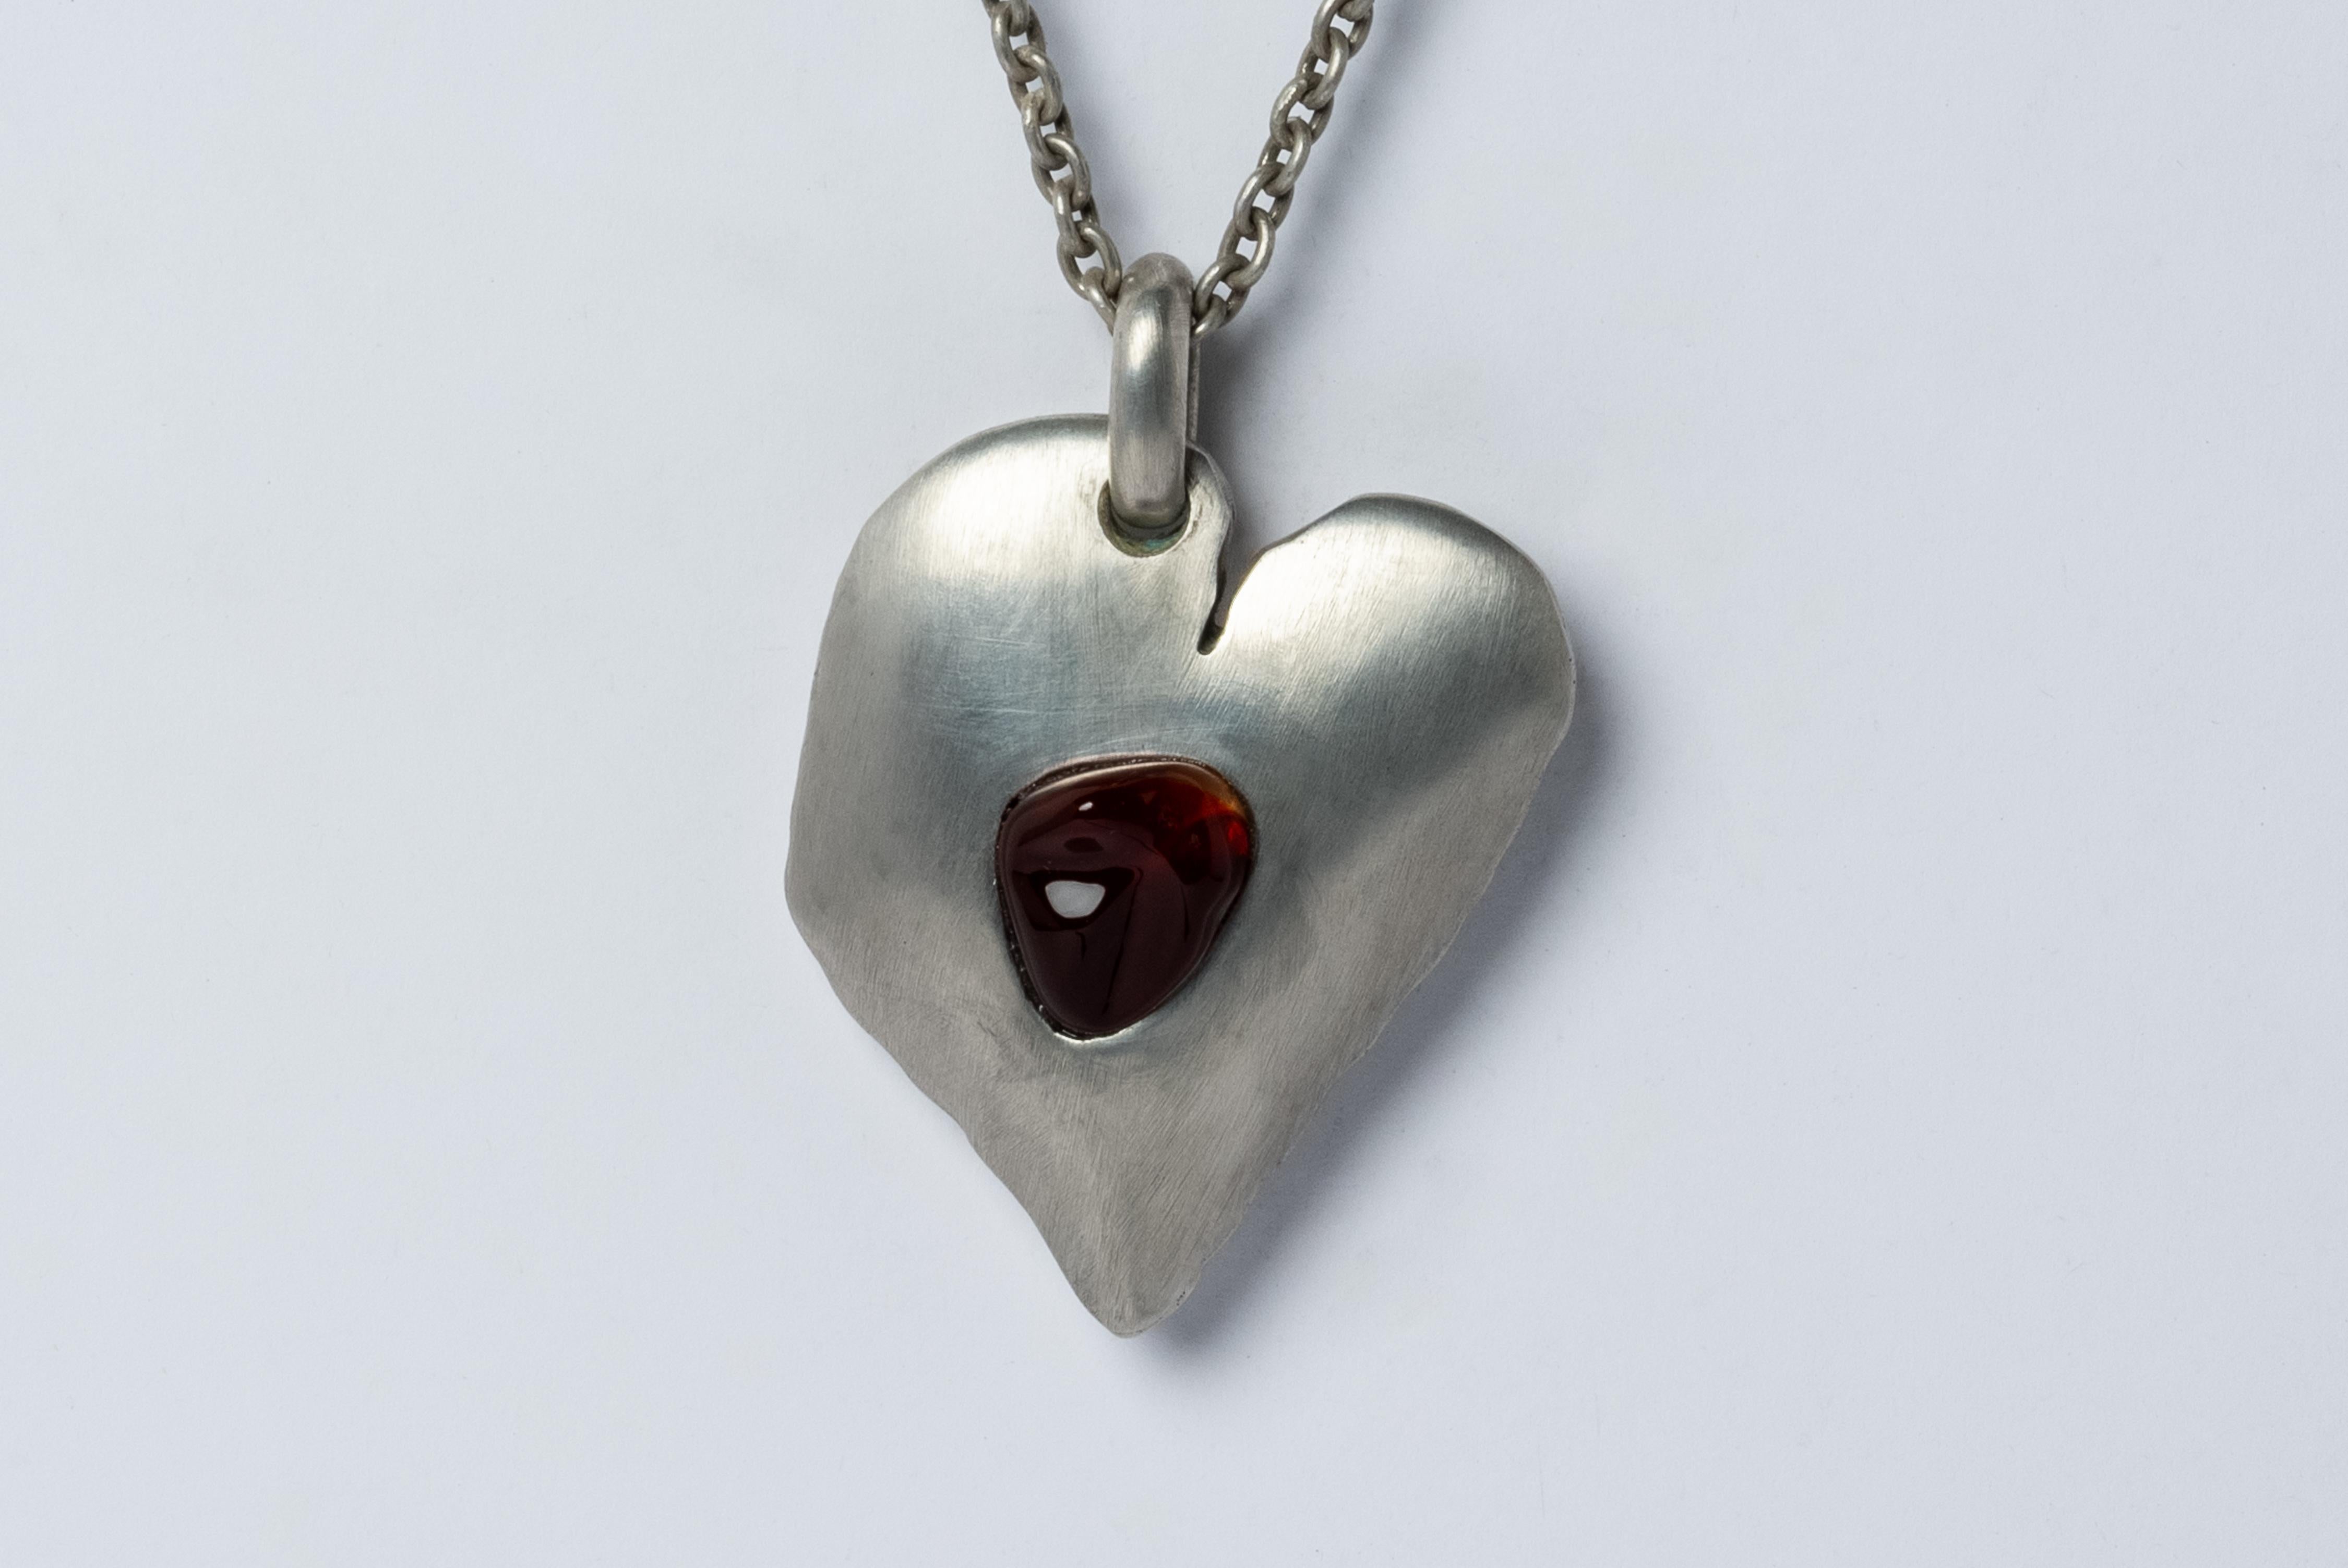 Jazz's Solid Heart Necklace made from dirty sterling silver and opal.
This series is based on a heart that Jazz, Evan’s daughter, drew directly on his chest when she was five years old. That day they went and had it tattooed directly onto Evan’s